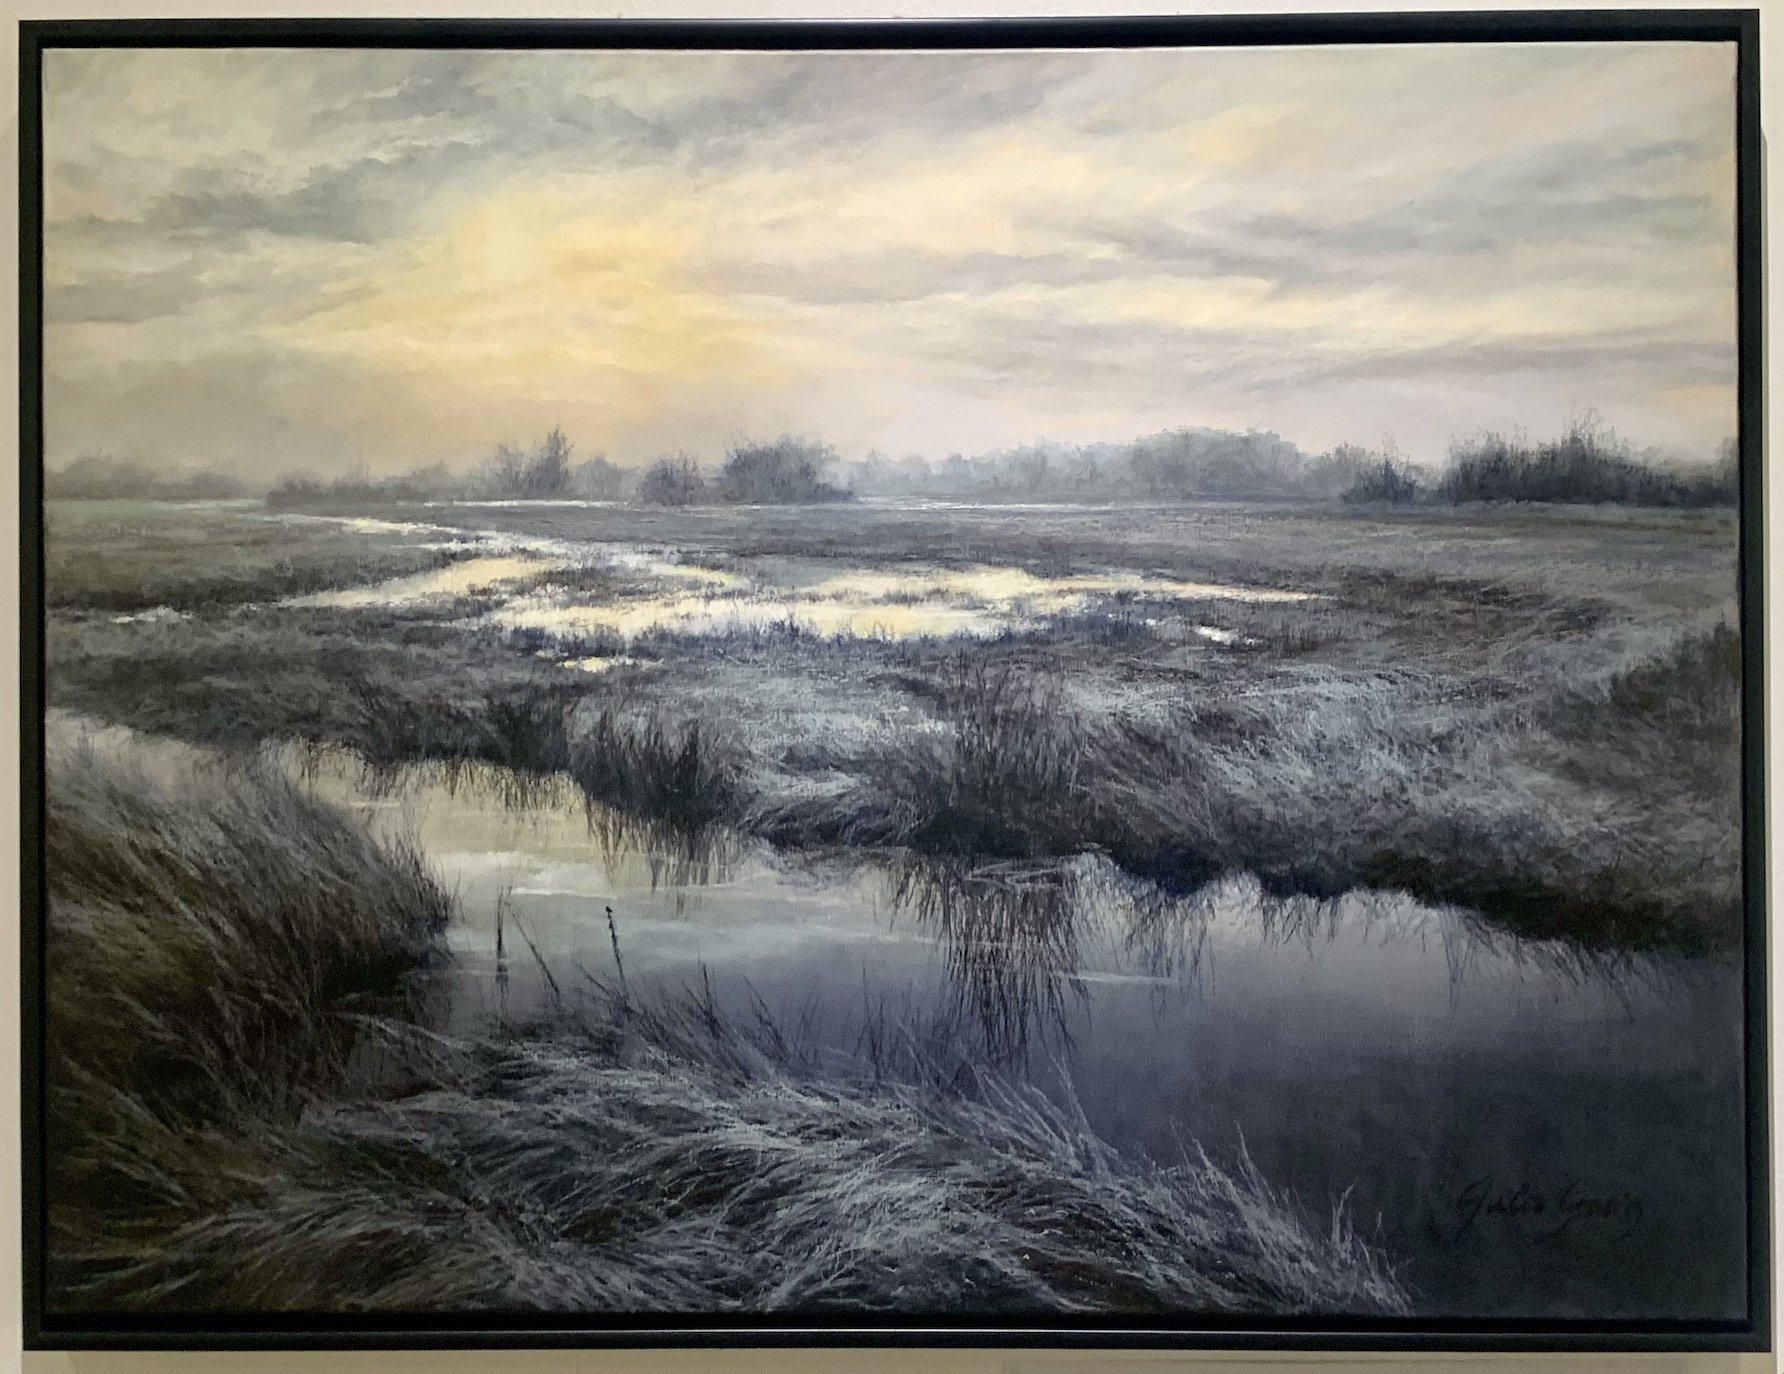 Silvery Morning, from the Creamery Bridge, by Julie Greig.